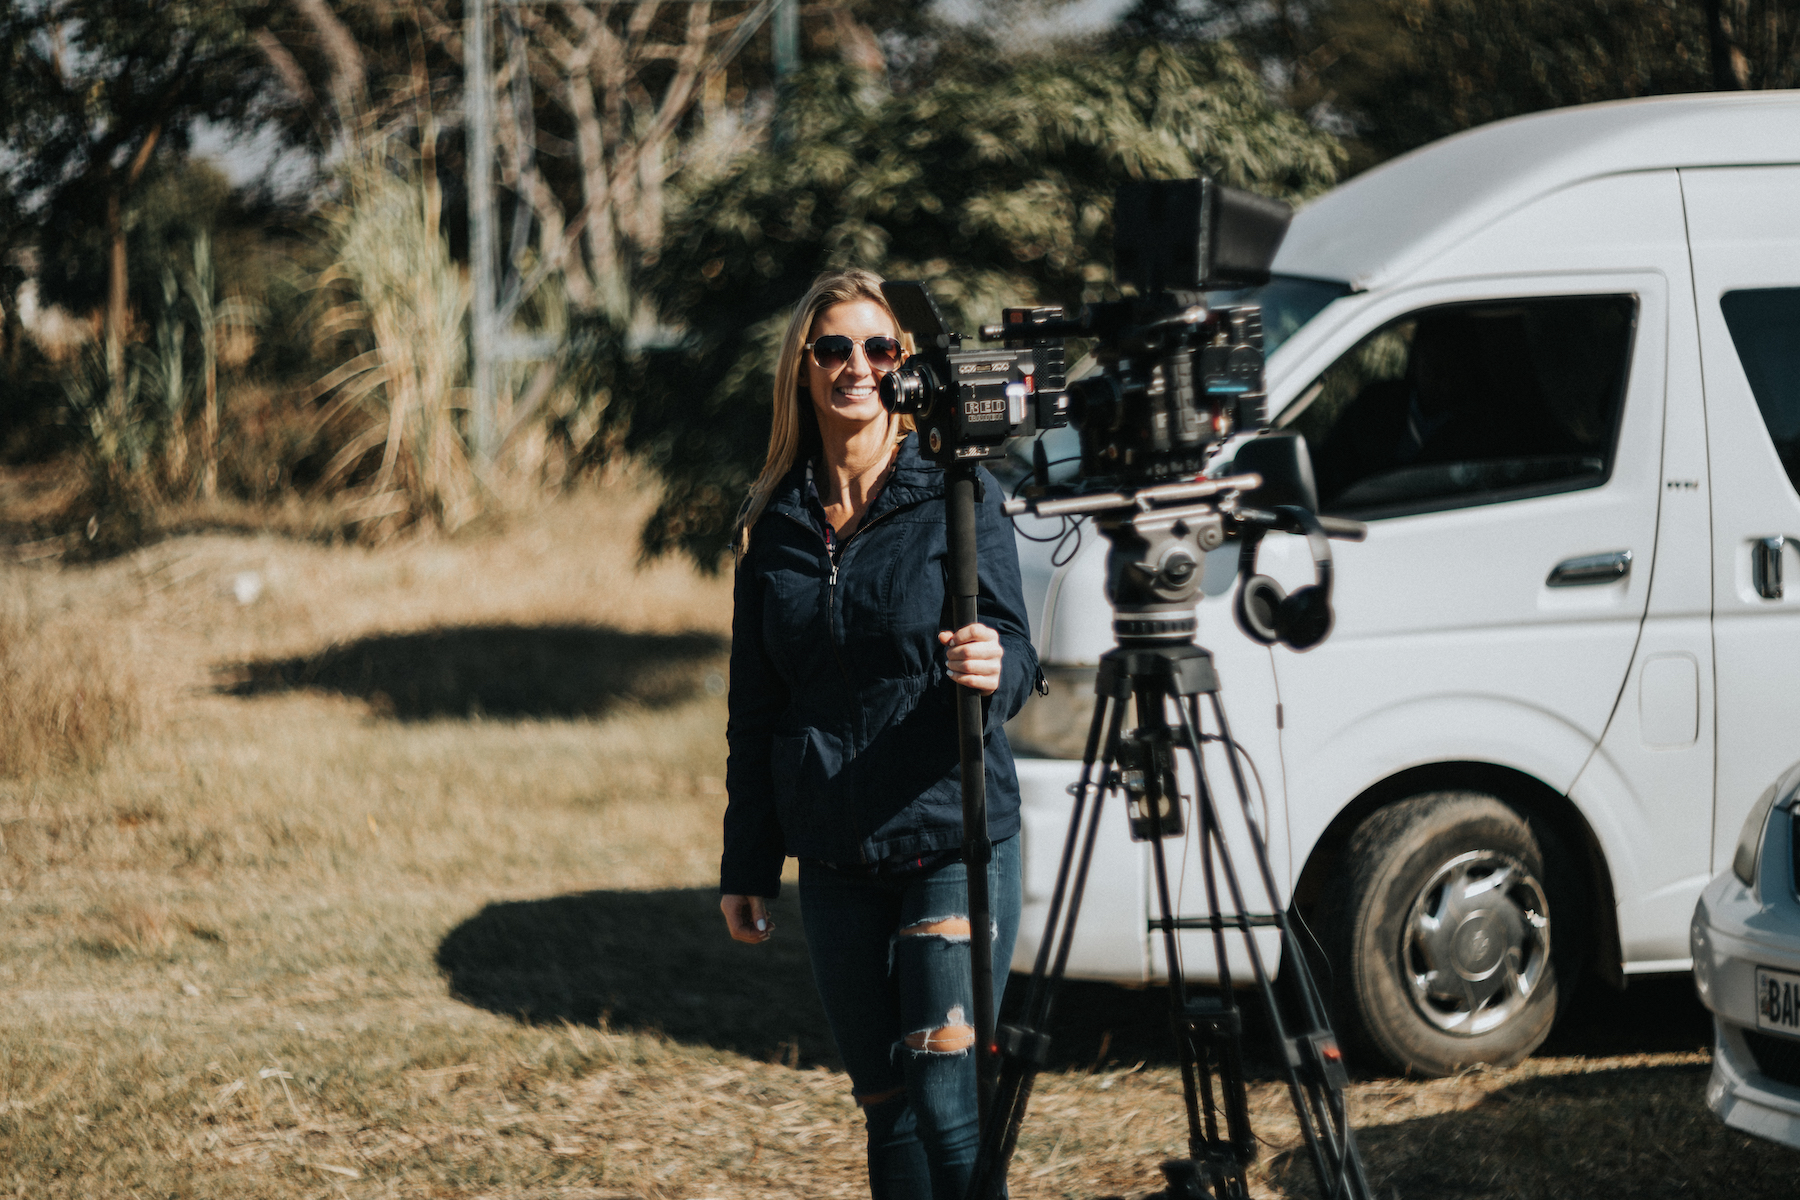 Marketing Woman with video equipment smiling for the camera